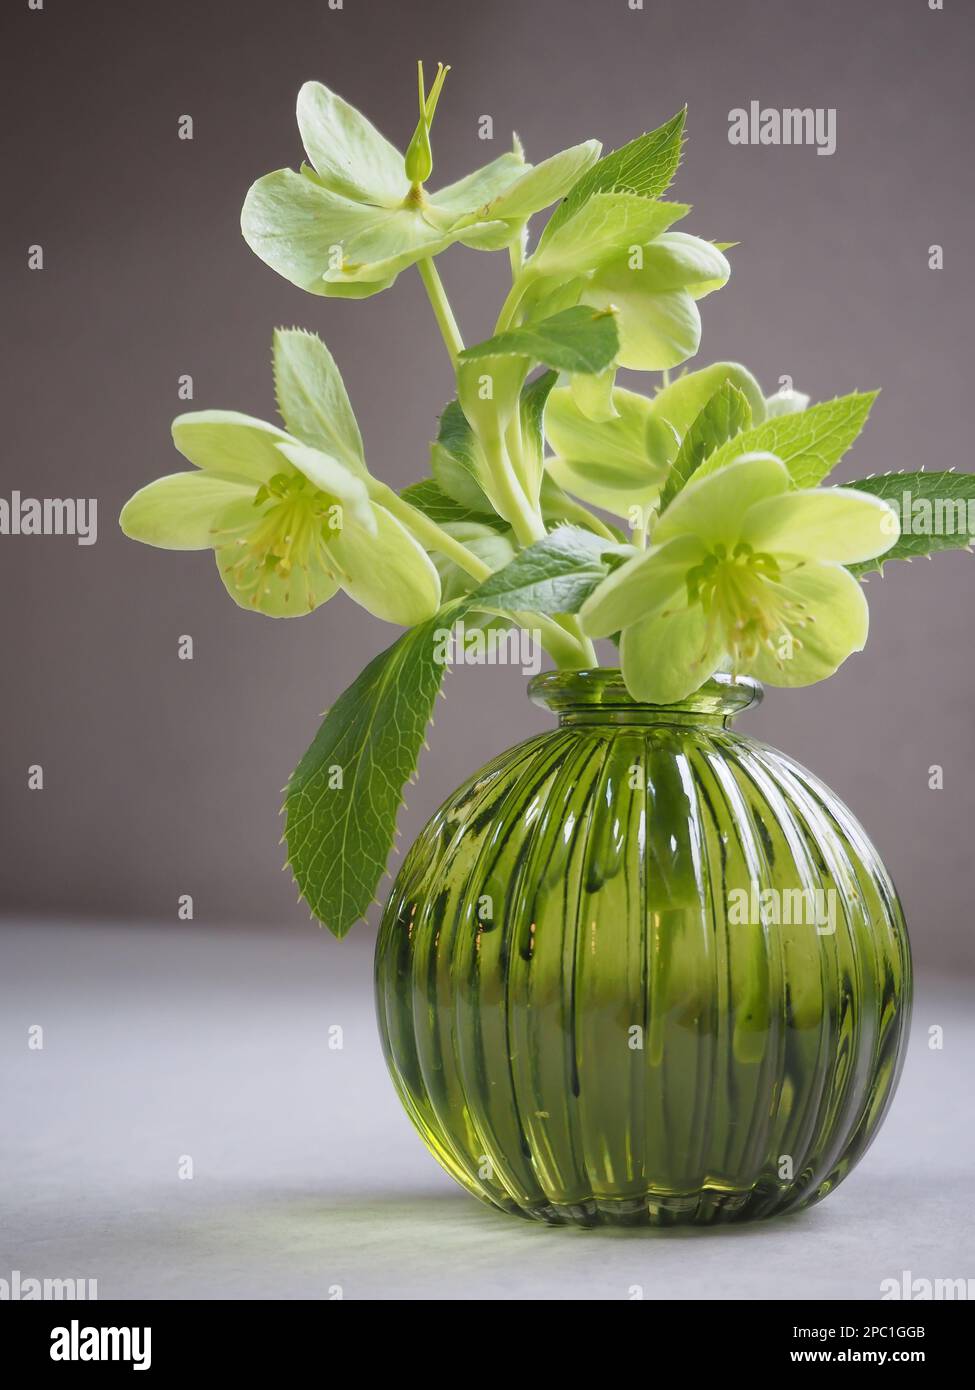 A small posy of Helleborus argutifolius (Holly-leaved hellebore) flowers cut from the garden and pictured in a ribbed green glass vase. Stock Photo